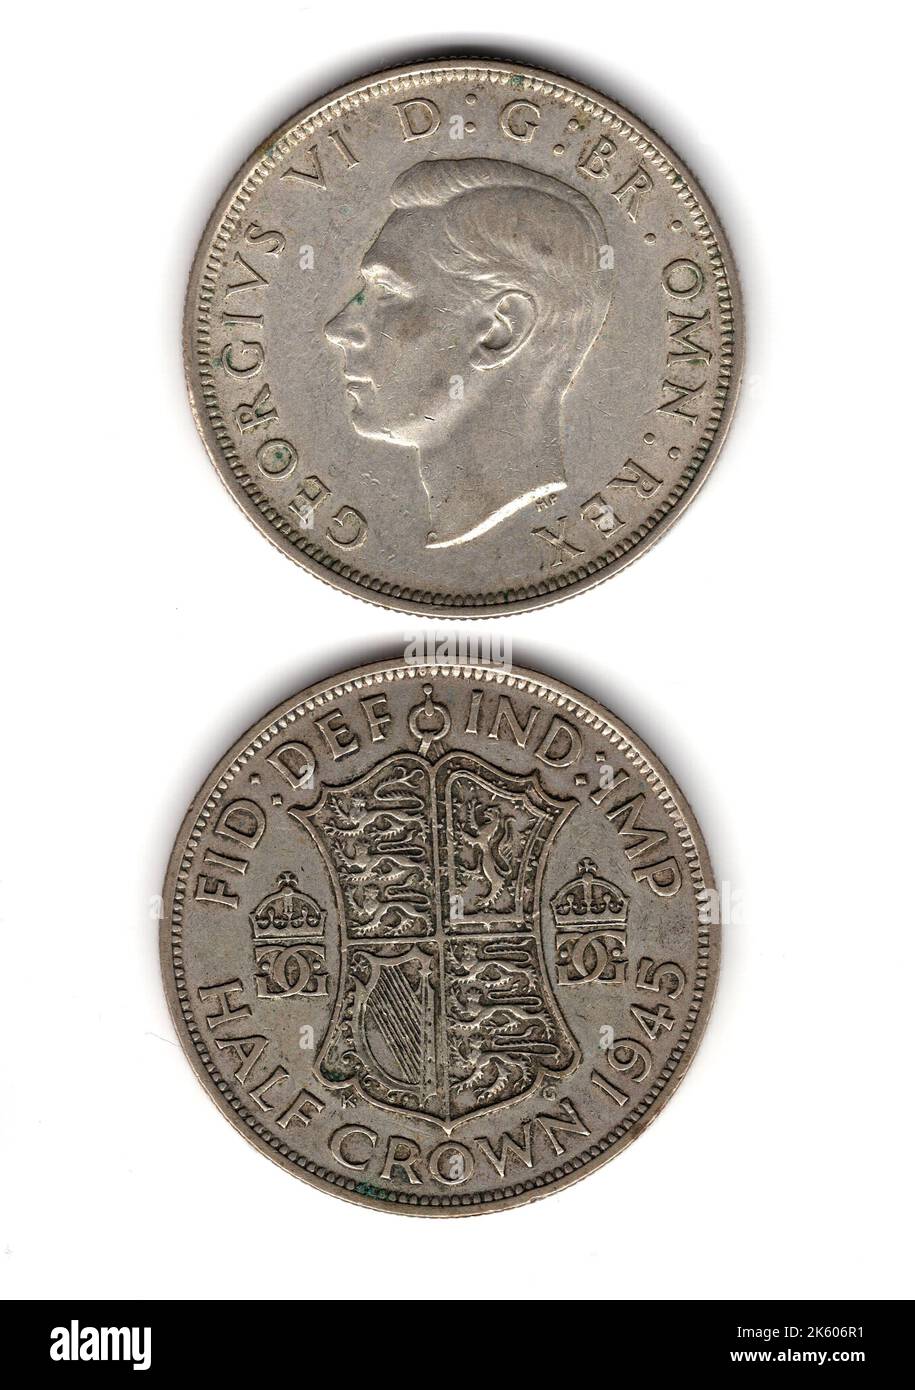 Vintage Great Britain half crown coins featuring King George VI. Stock Photo